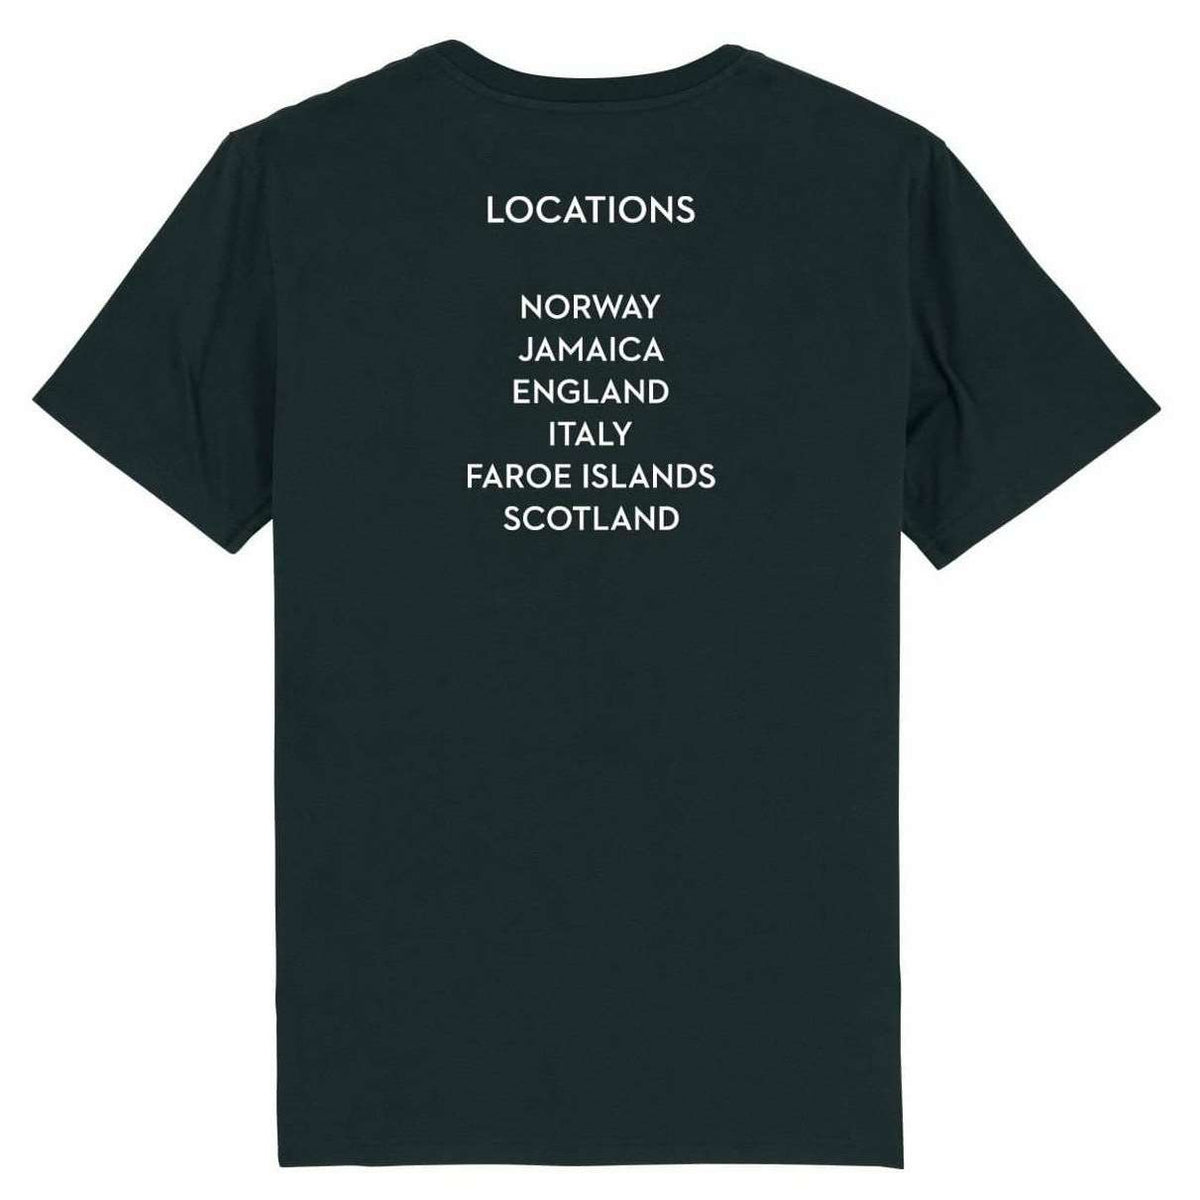 James Bond No Time To Die Locations T-Shirt (Outlet Item)